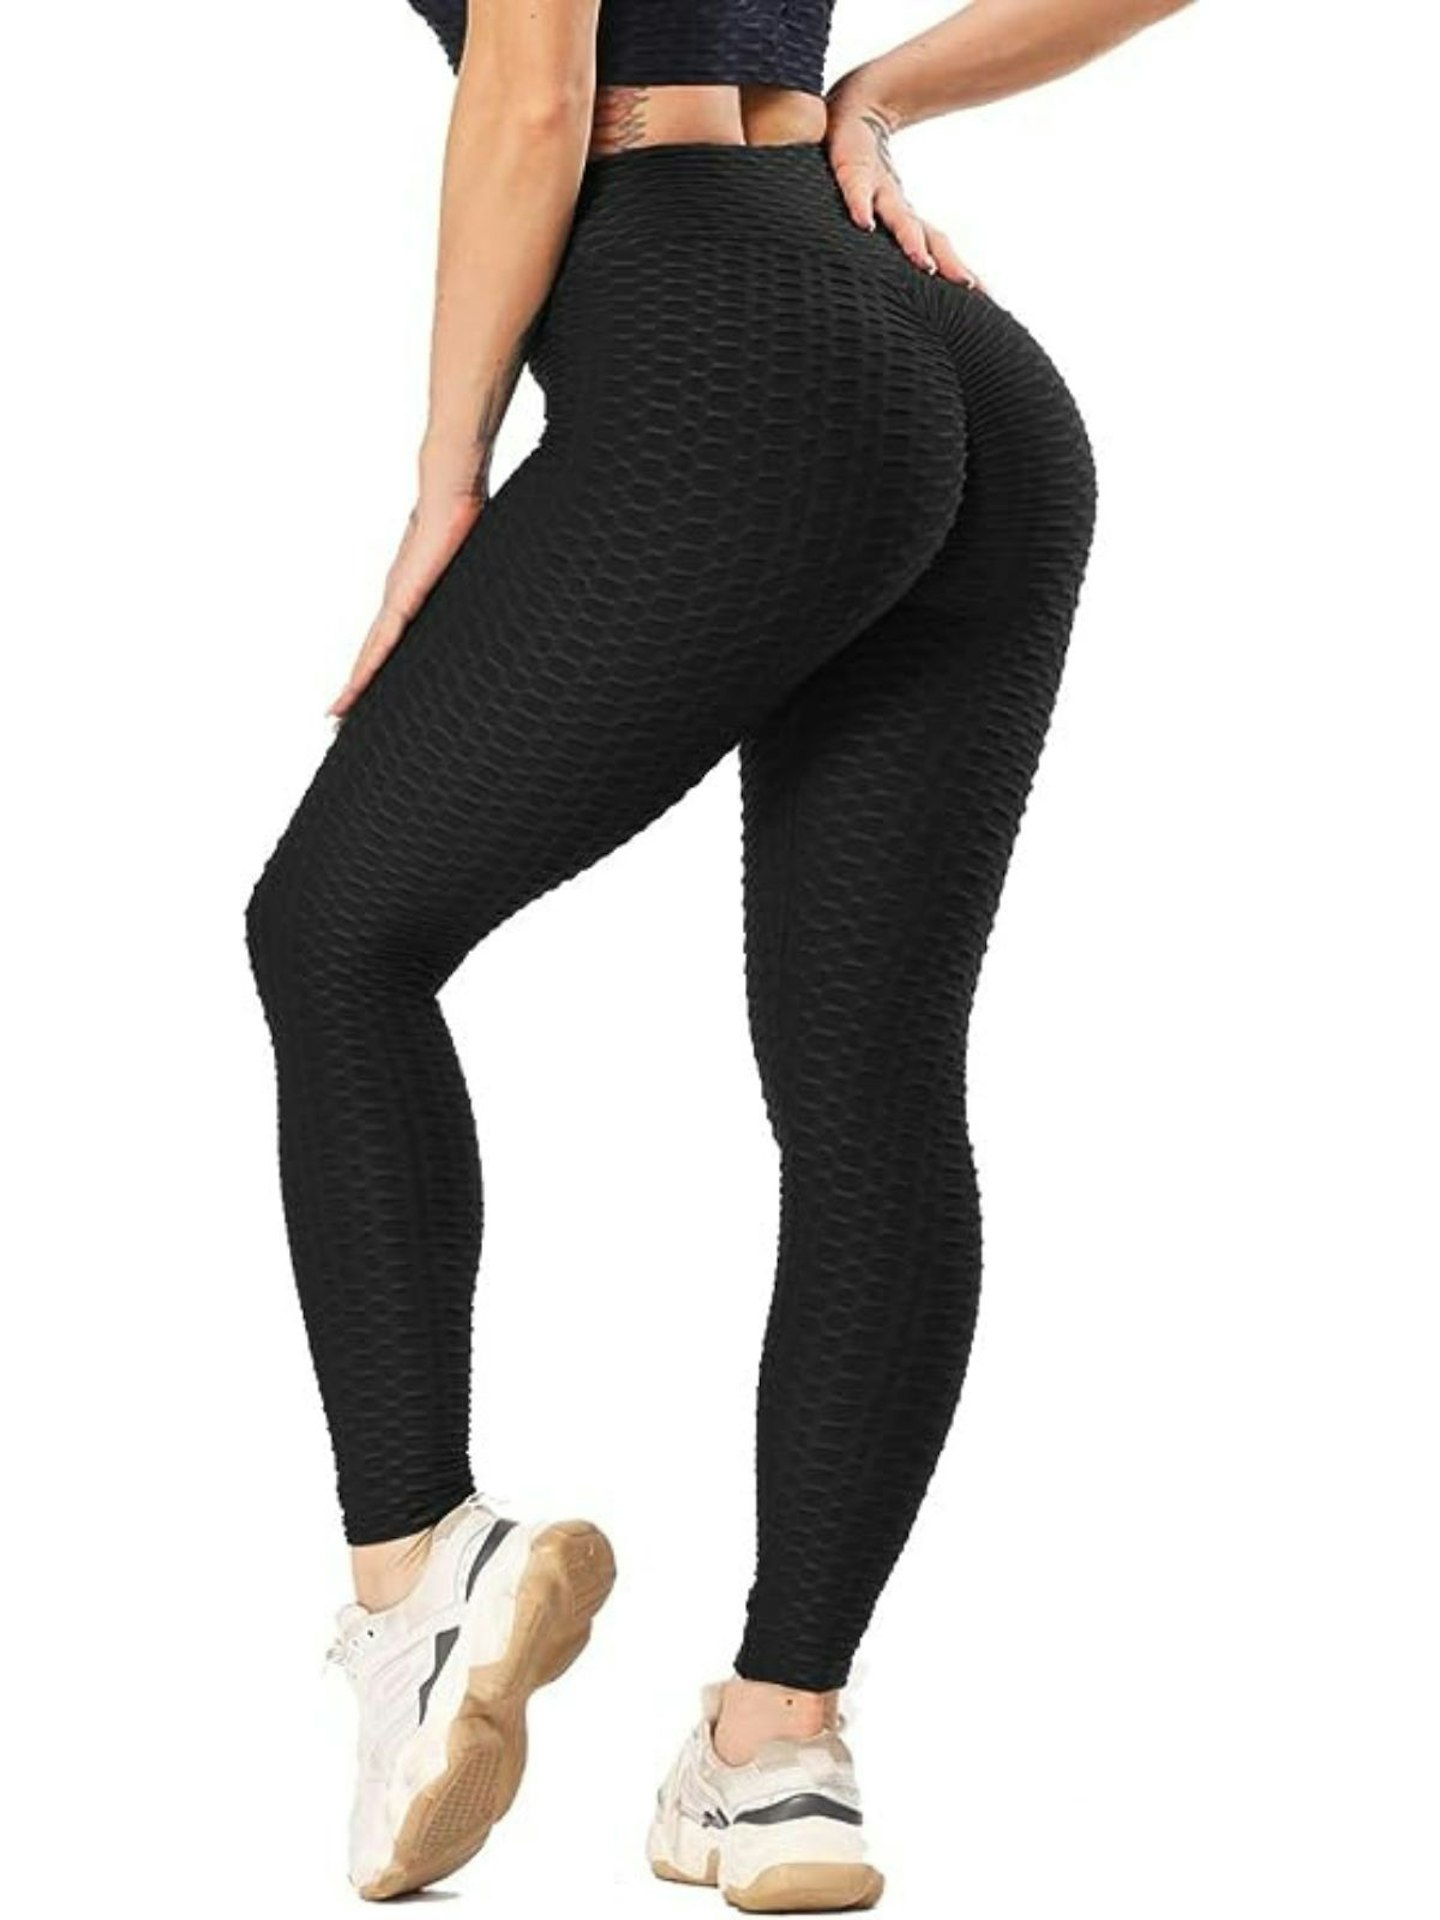 The  Honeycomb Leggings Loved By Chloe Ferry